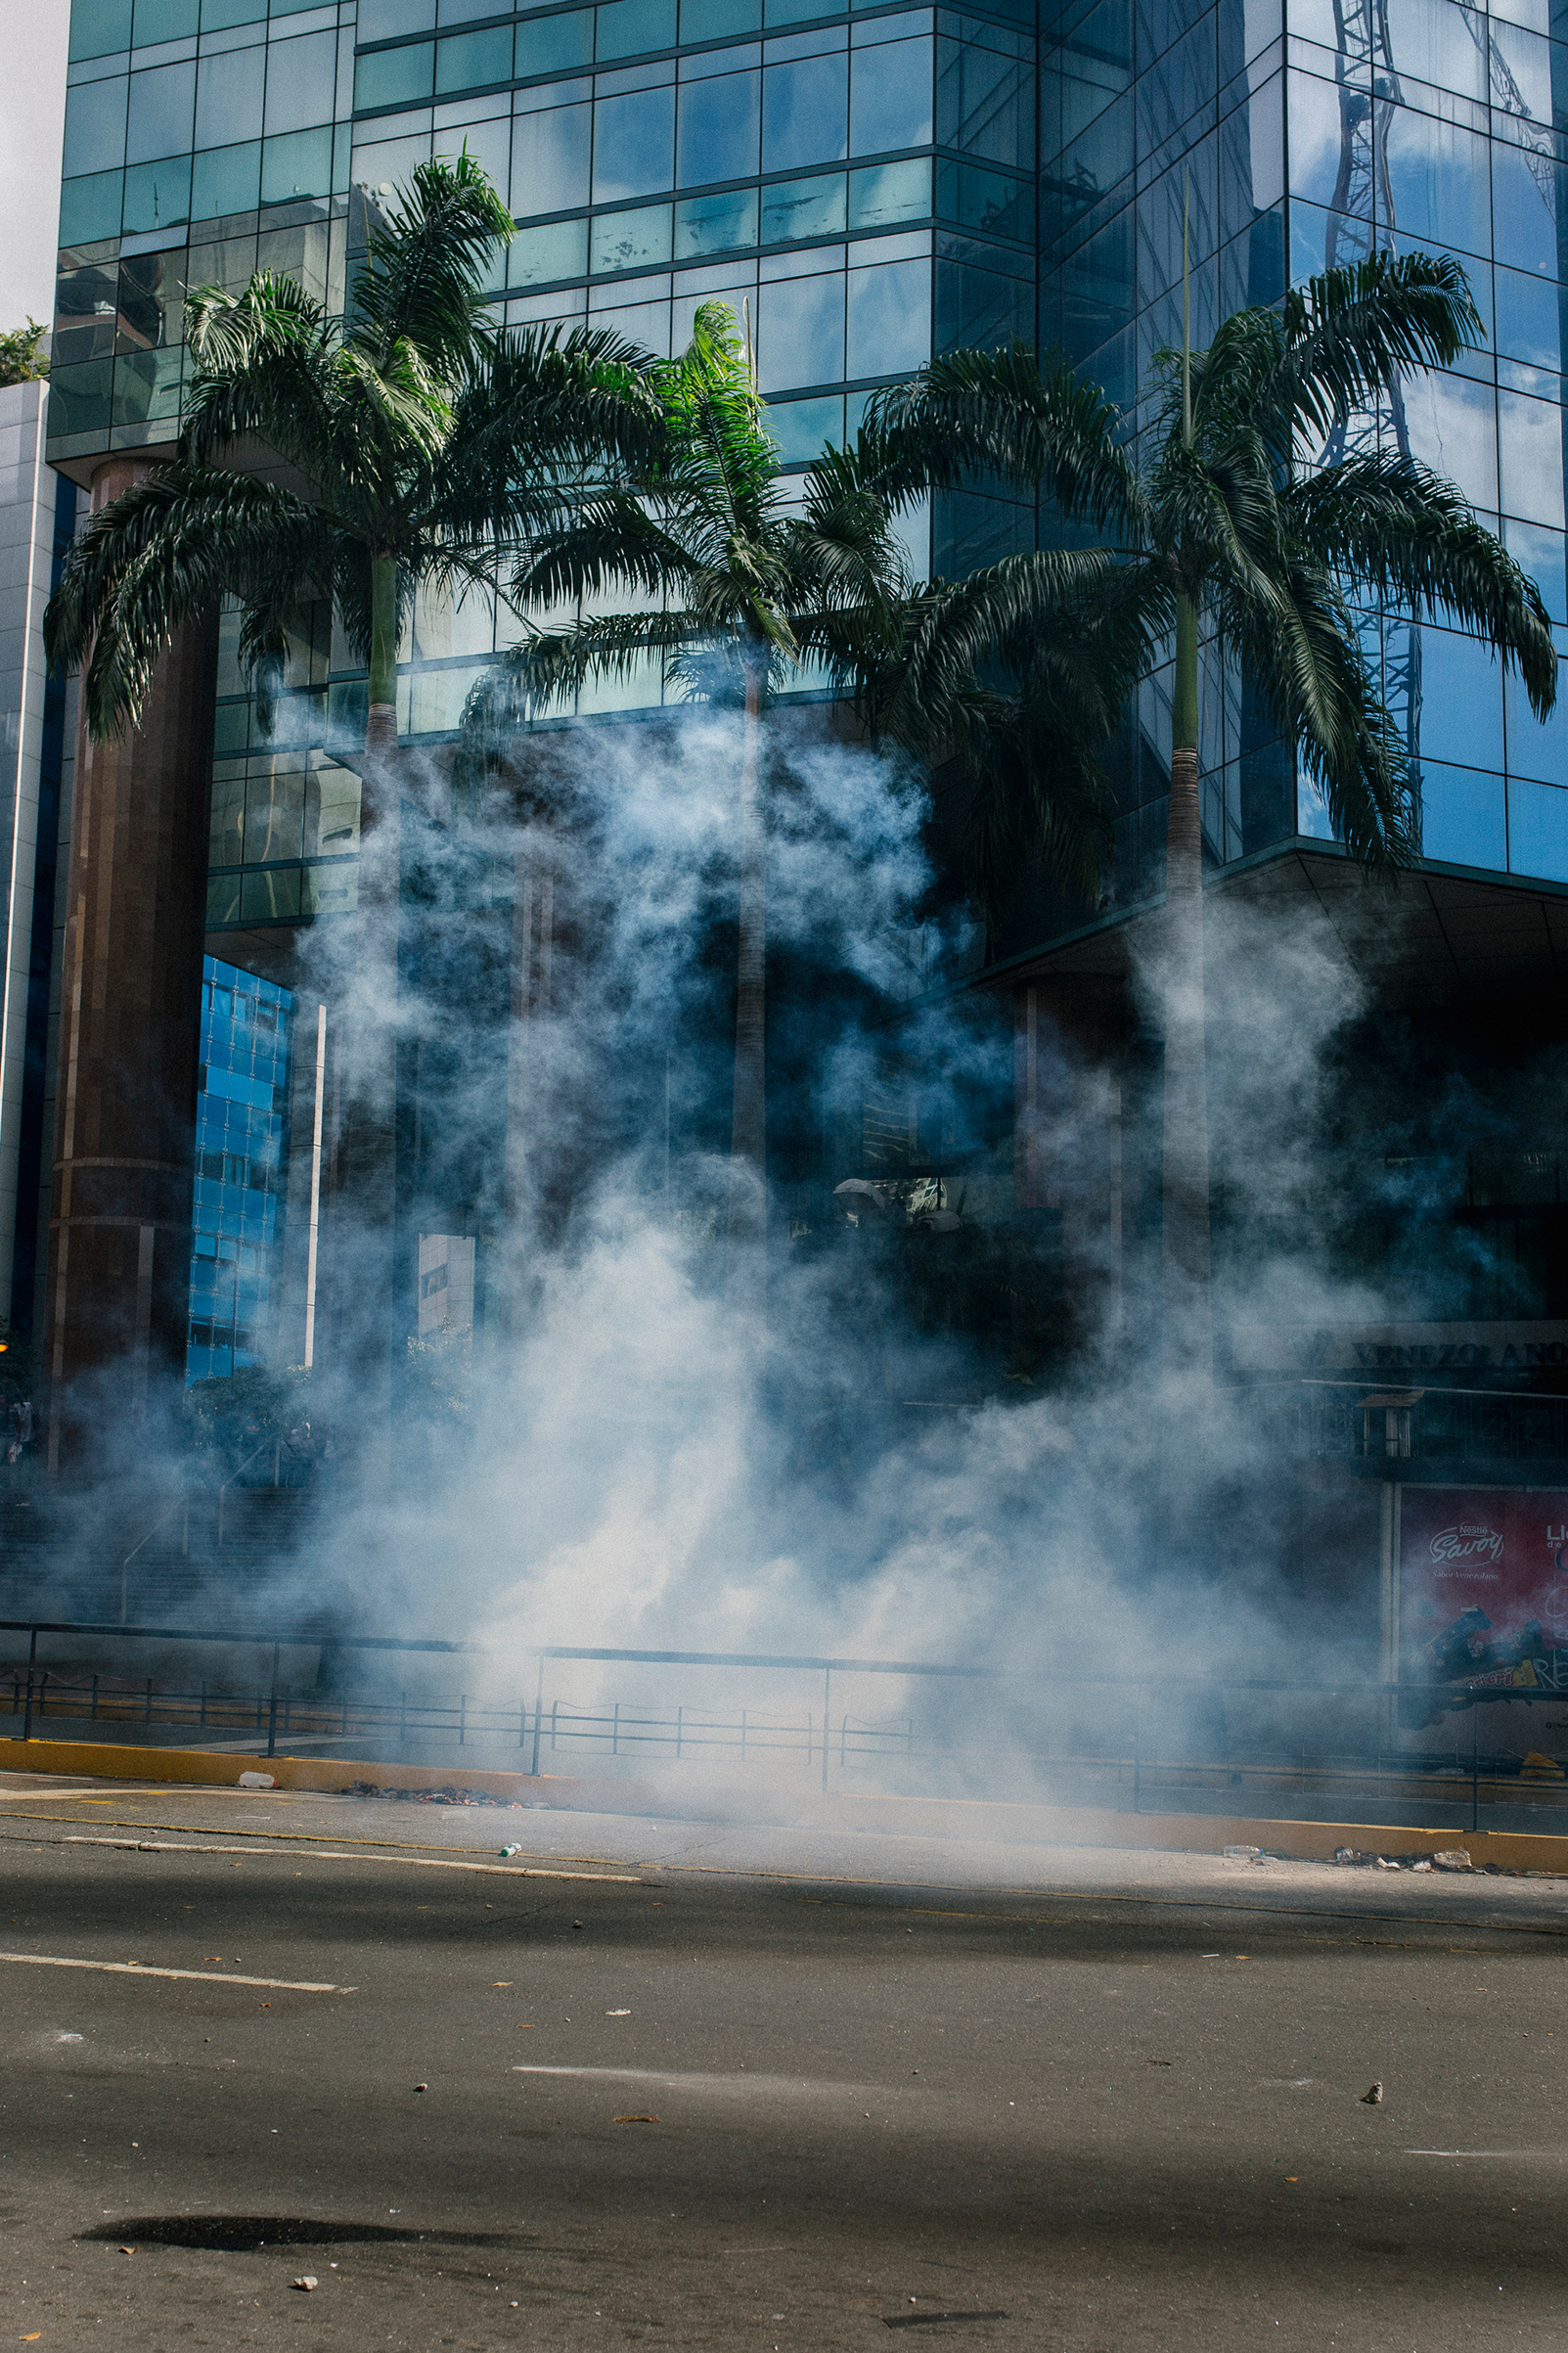 Tear gas floats over the pavement during a protest in El Rosal in Caracas on Jan. 23, 2019. (Andrea Hernandez)